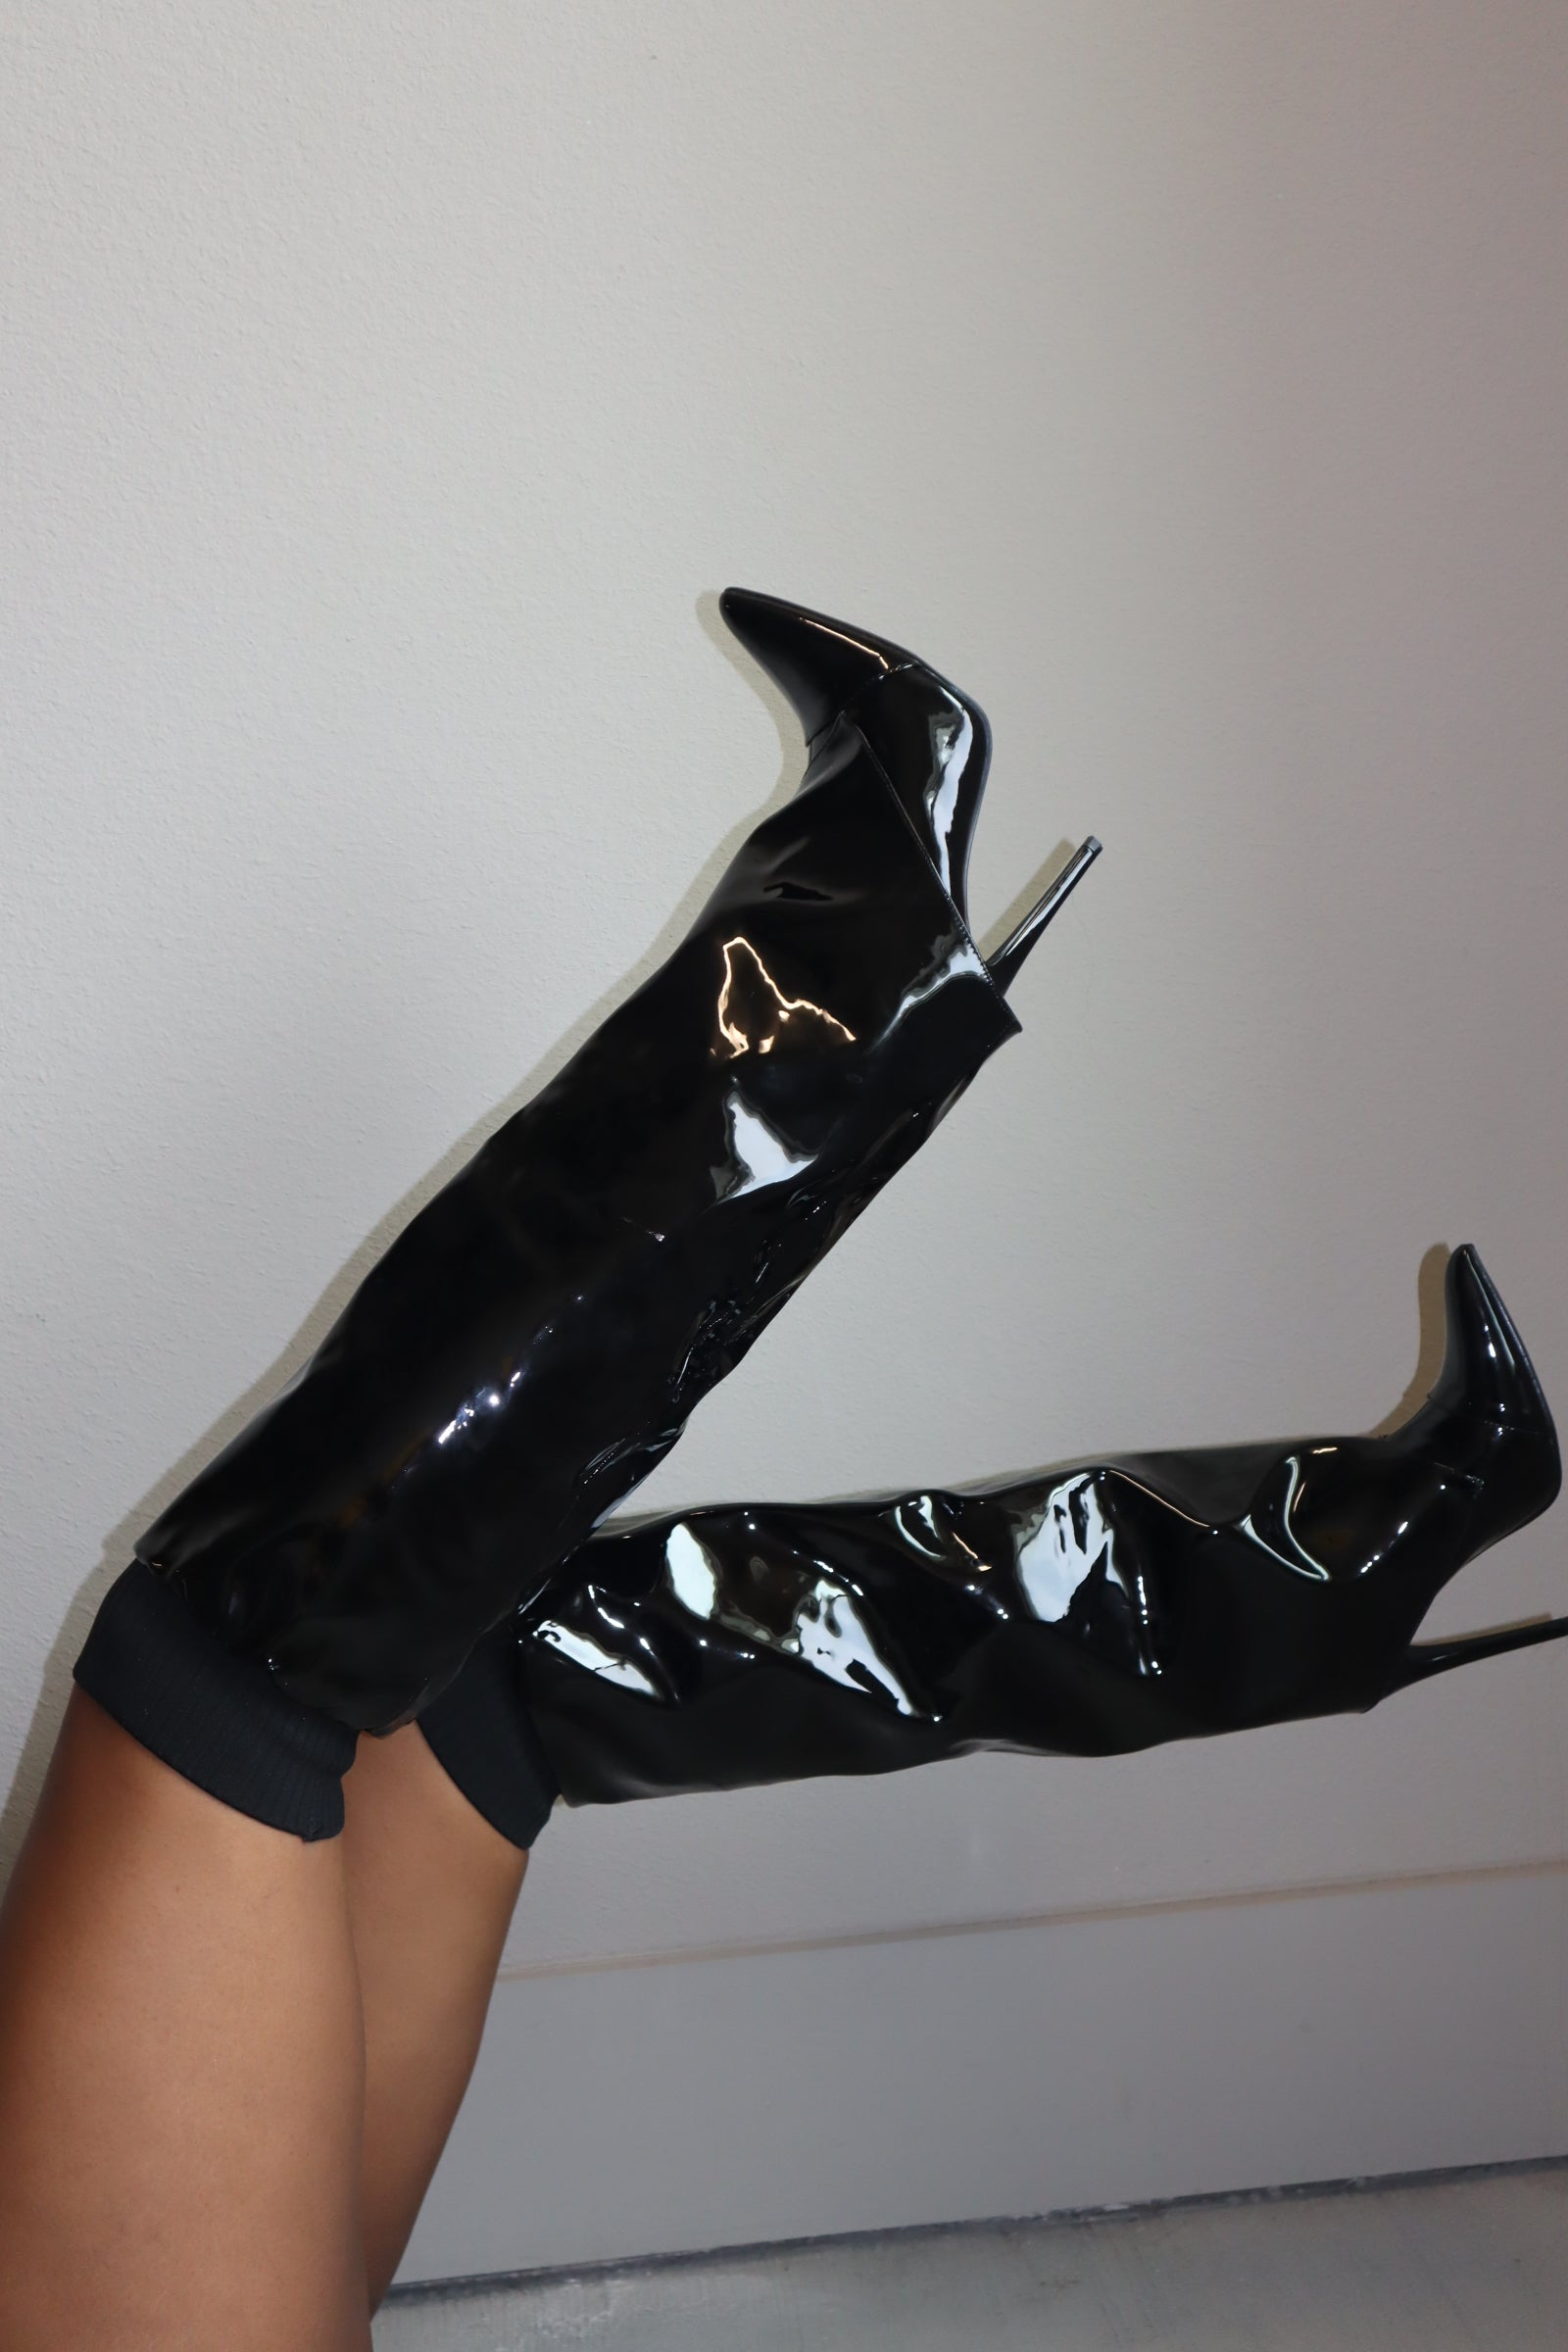 Patent leather knee-high boot